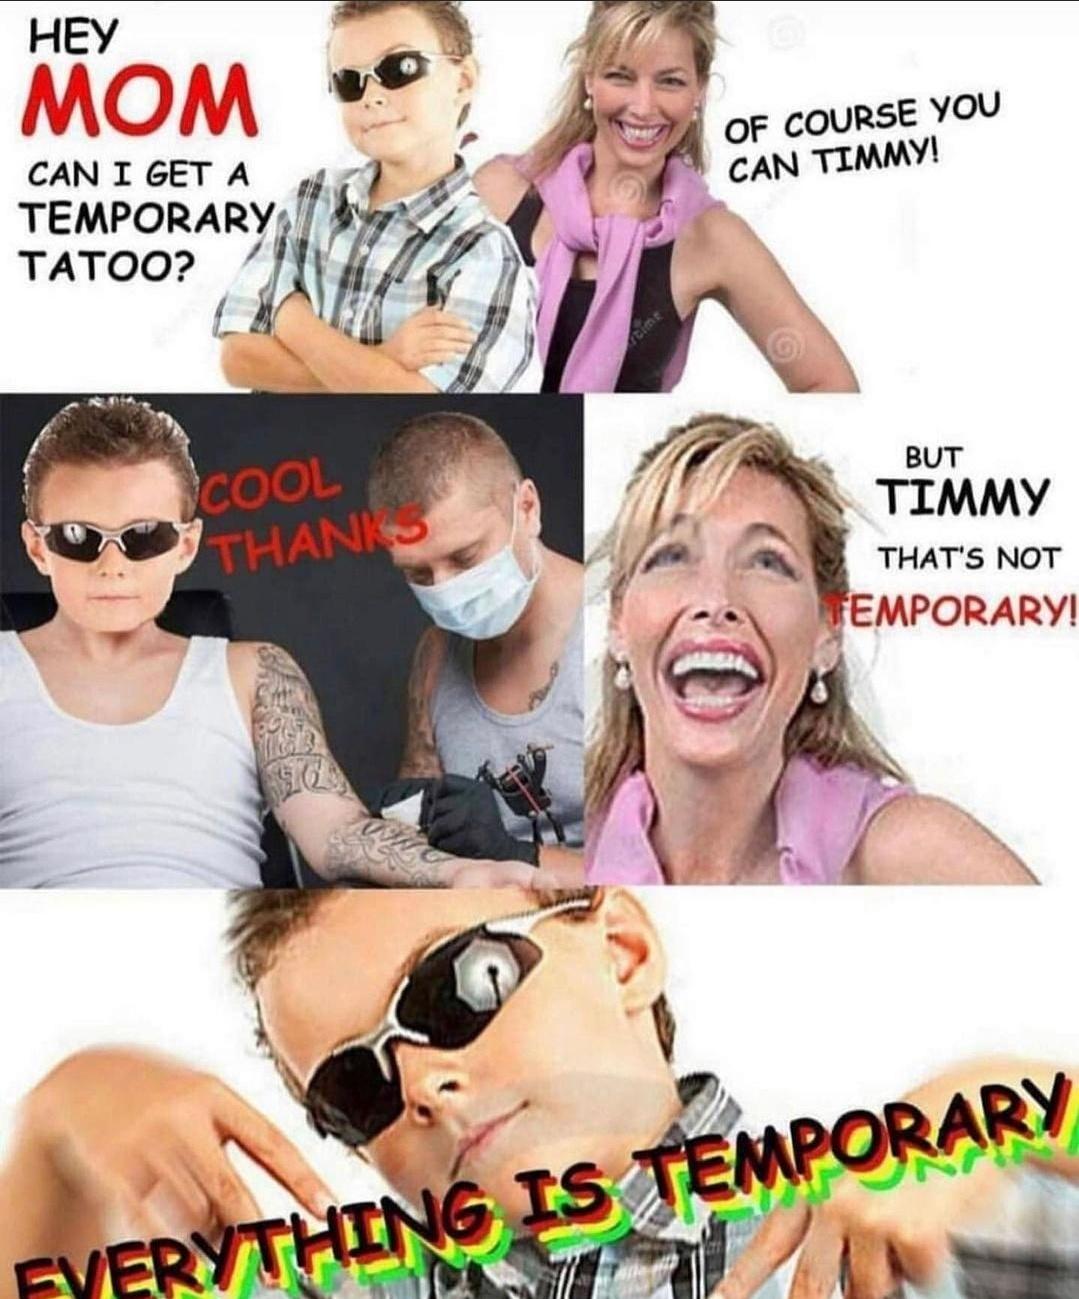 fresh memes - facebook cringe meme - Hey Mom Can I Get A Temporary Tatoo? Cool Thanks Mige Of Course You Can Timmy! But Timmy That'S Not Temporary! Fverything Is Temporary